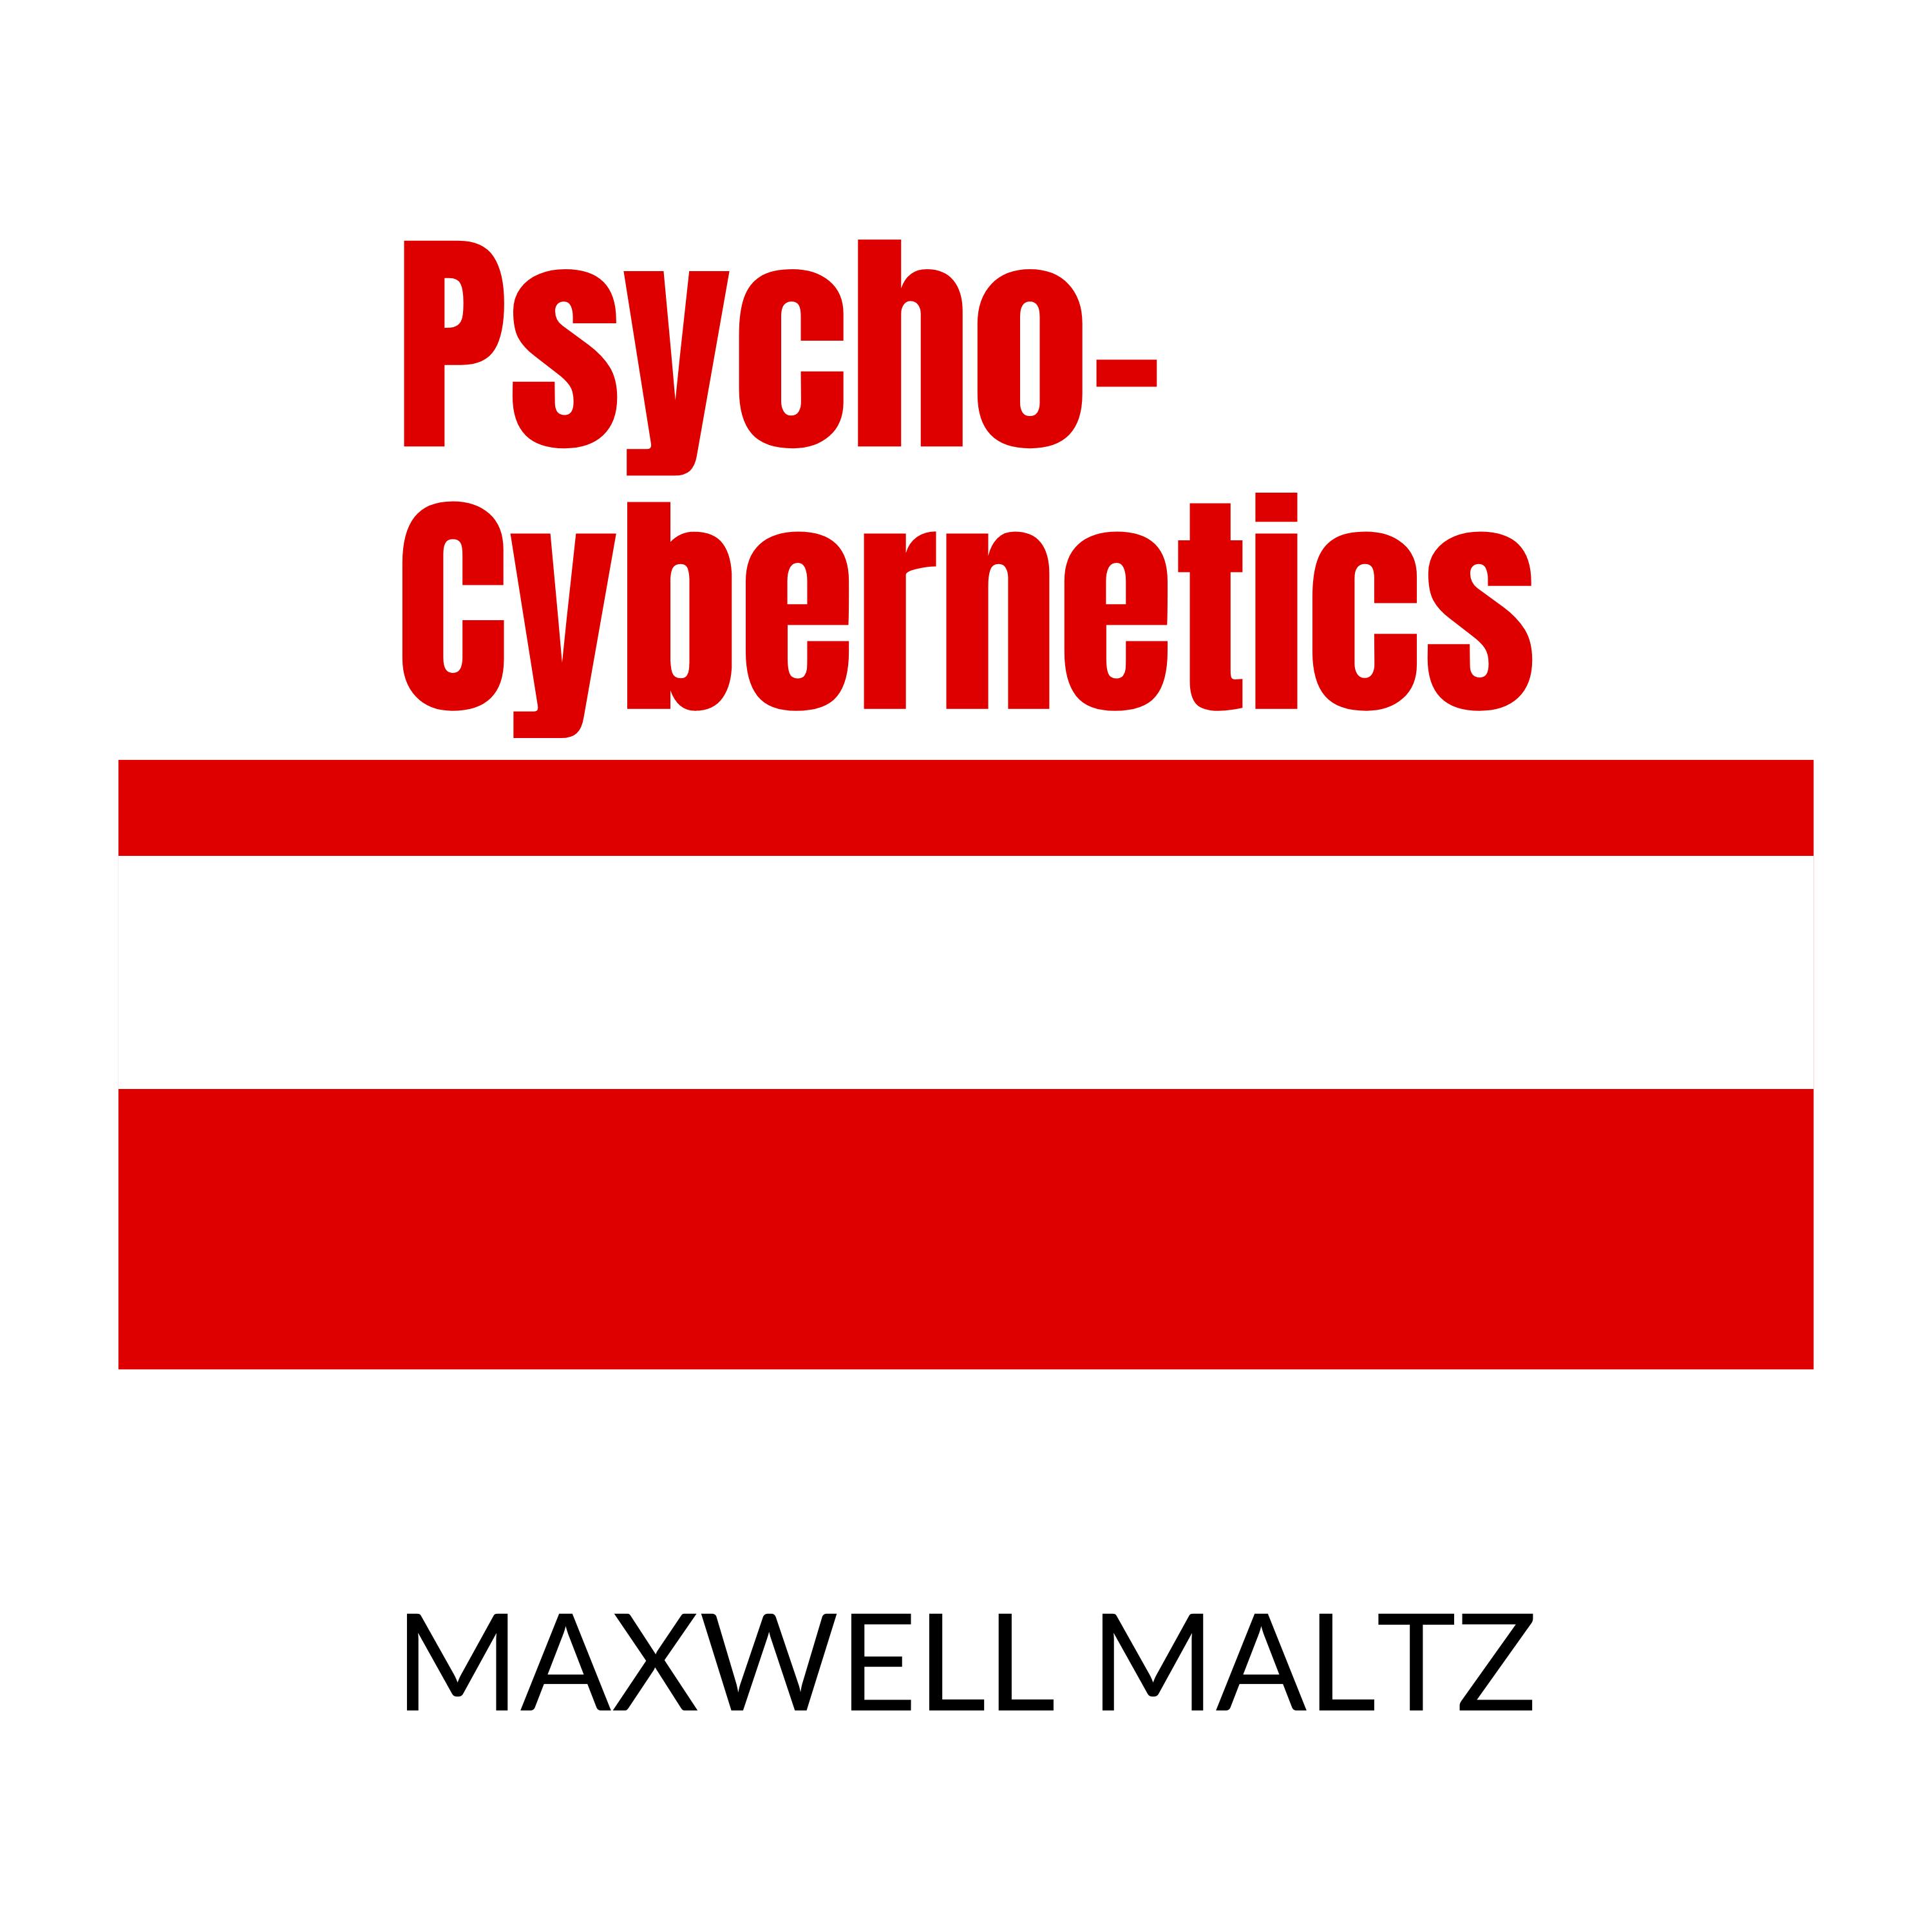 Psycho-Cybernetics by Maxwell Maltz | Book Summary and Review | Free Audiobook